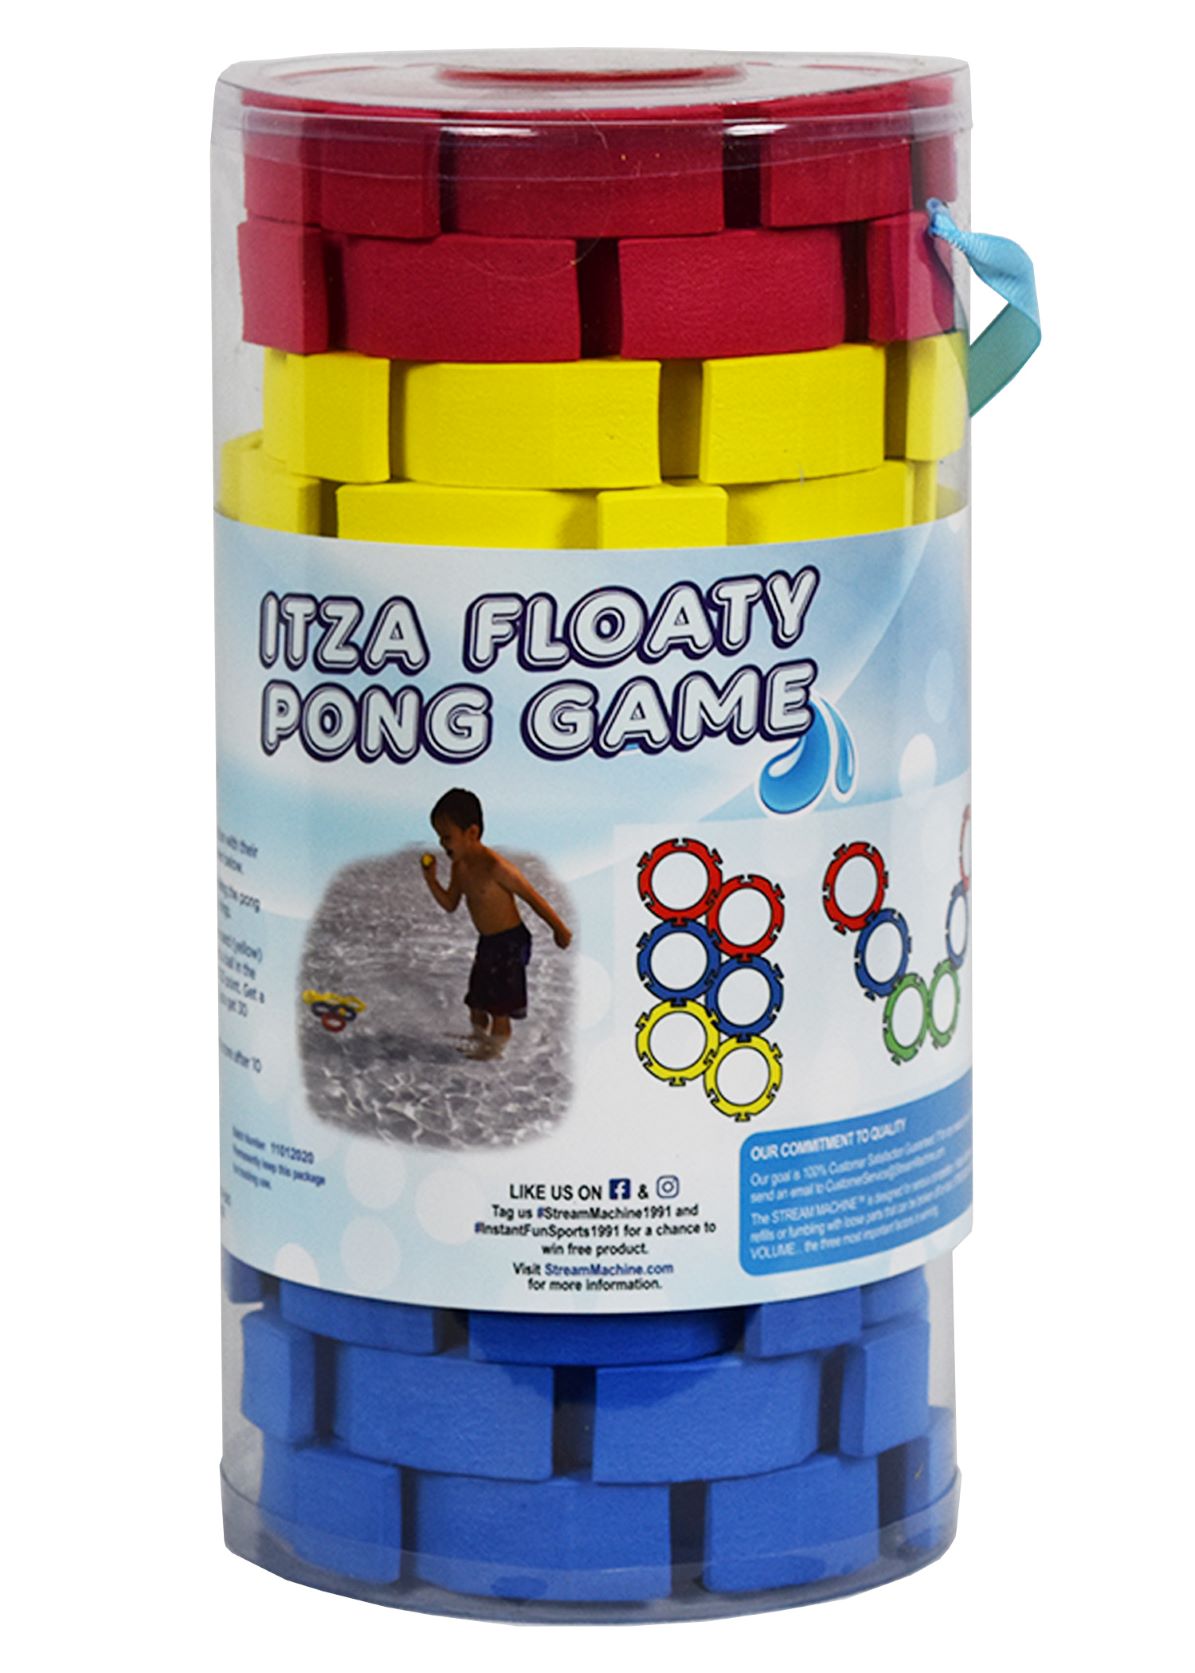 Itza Floaty Pong Game Cover